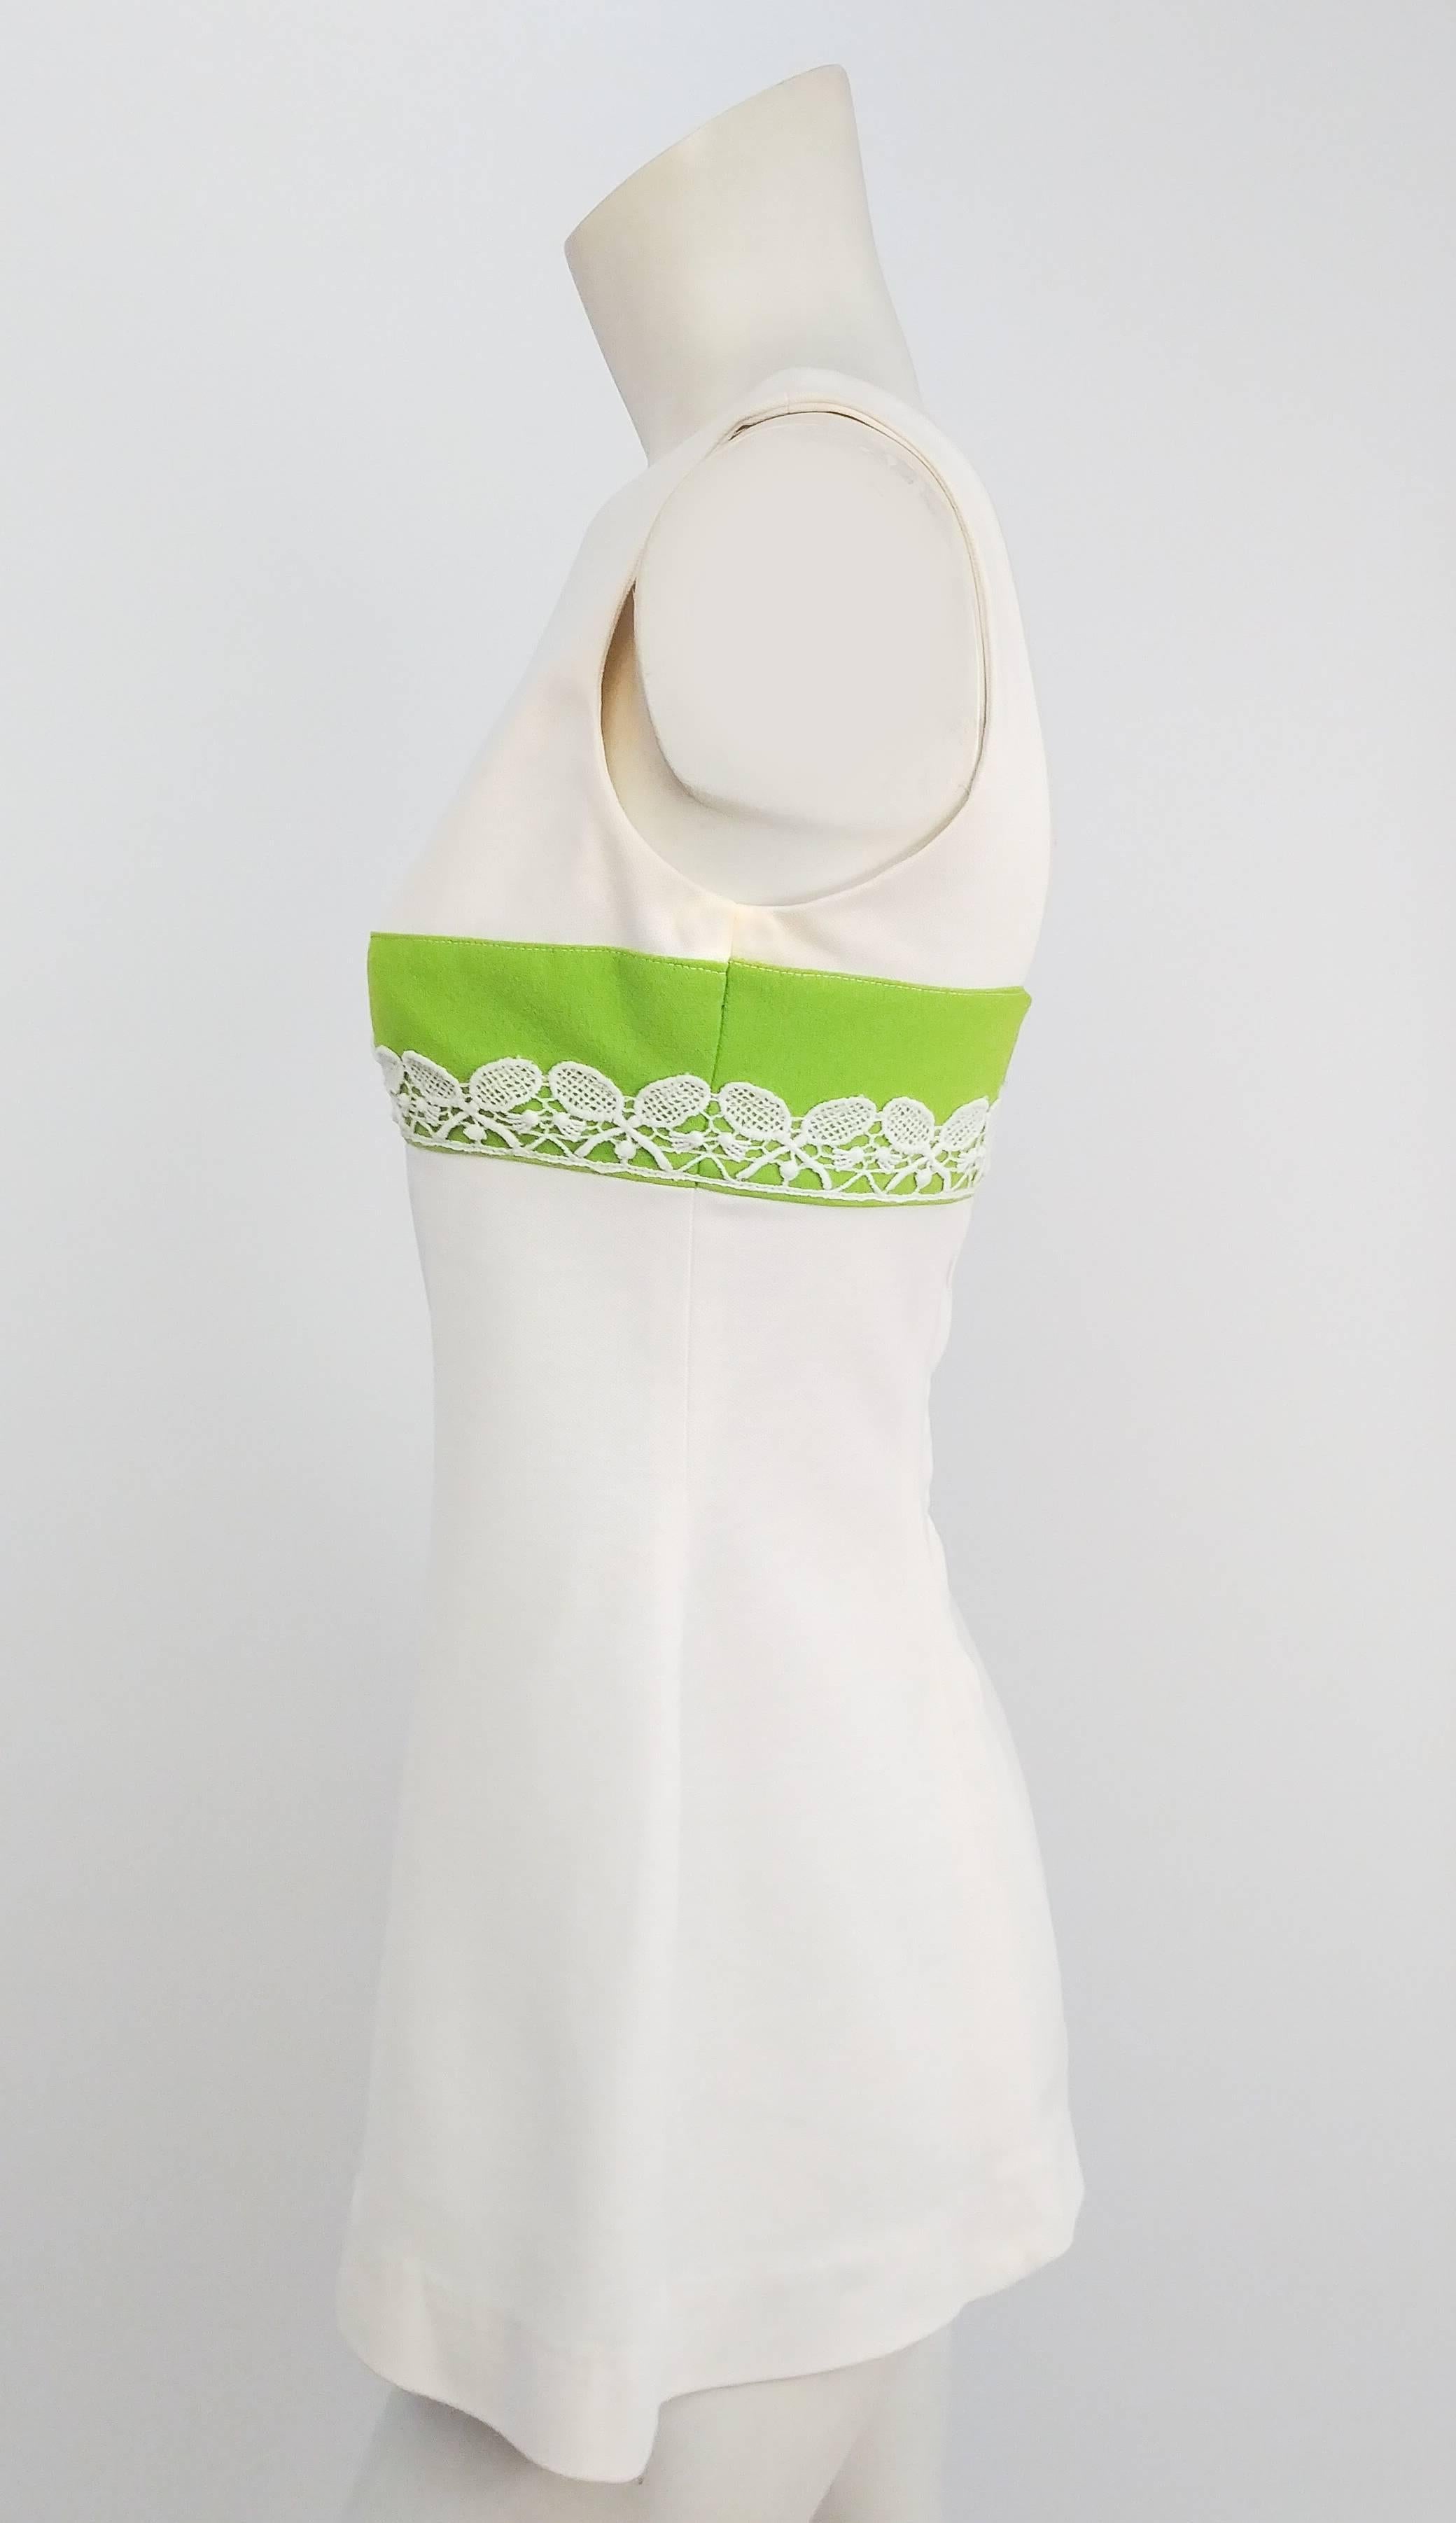 1960s Tennis Mini Dress w/ Racket Lace. Lime contrast band creates empire waistline. Unlined. Zips up back.